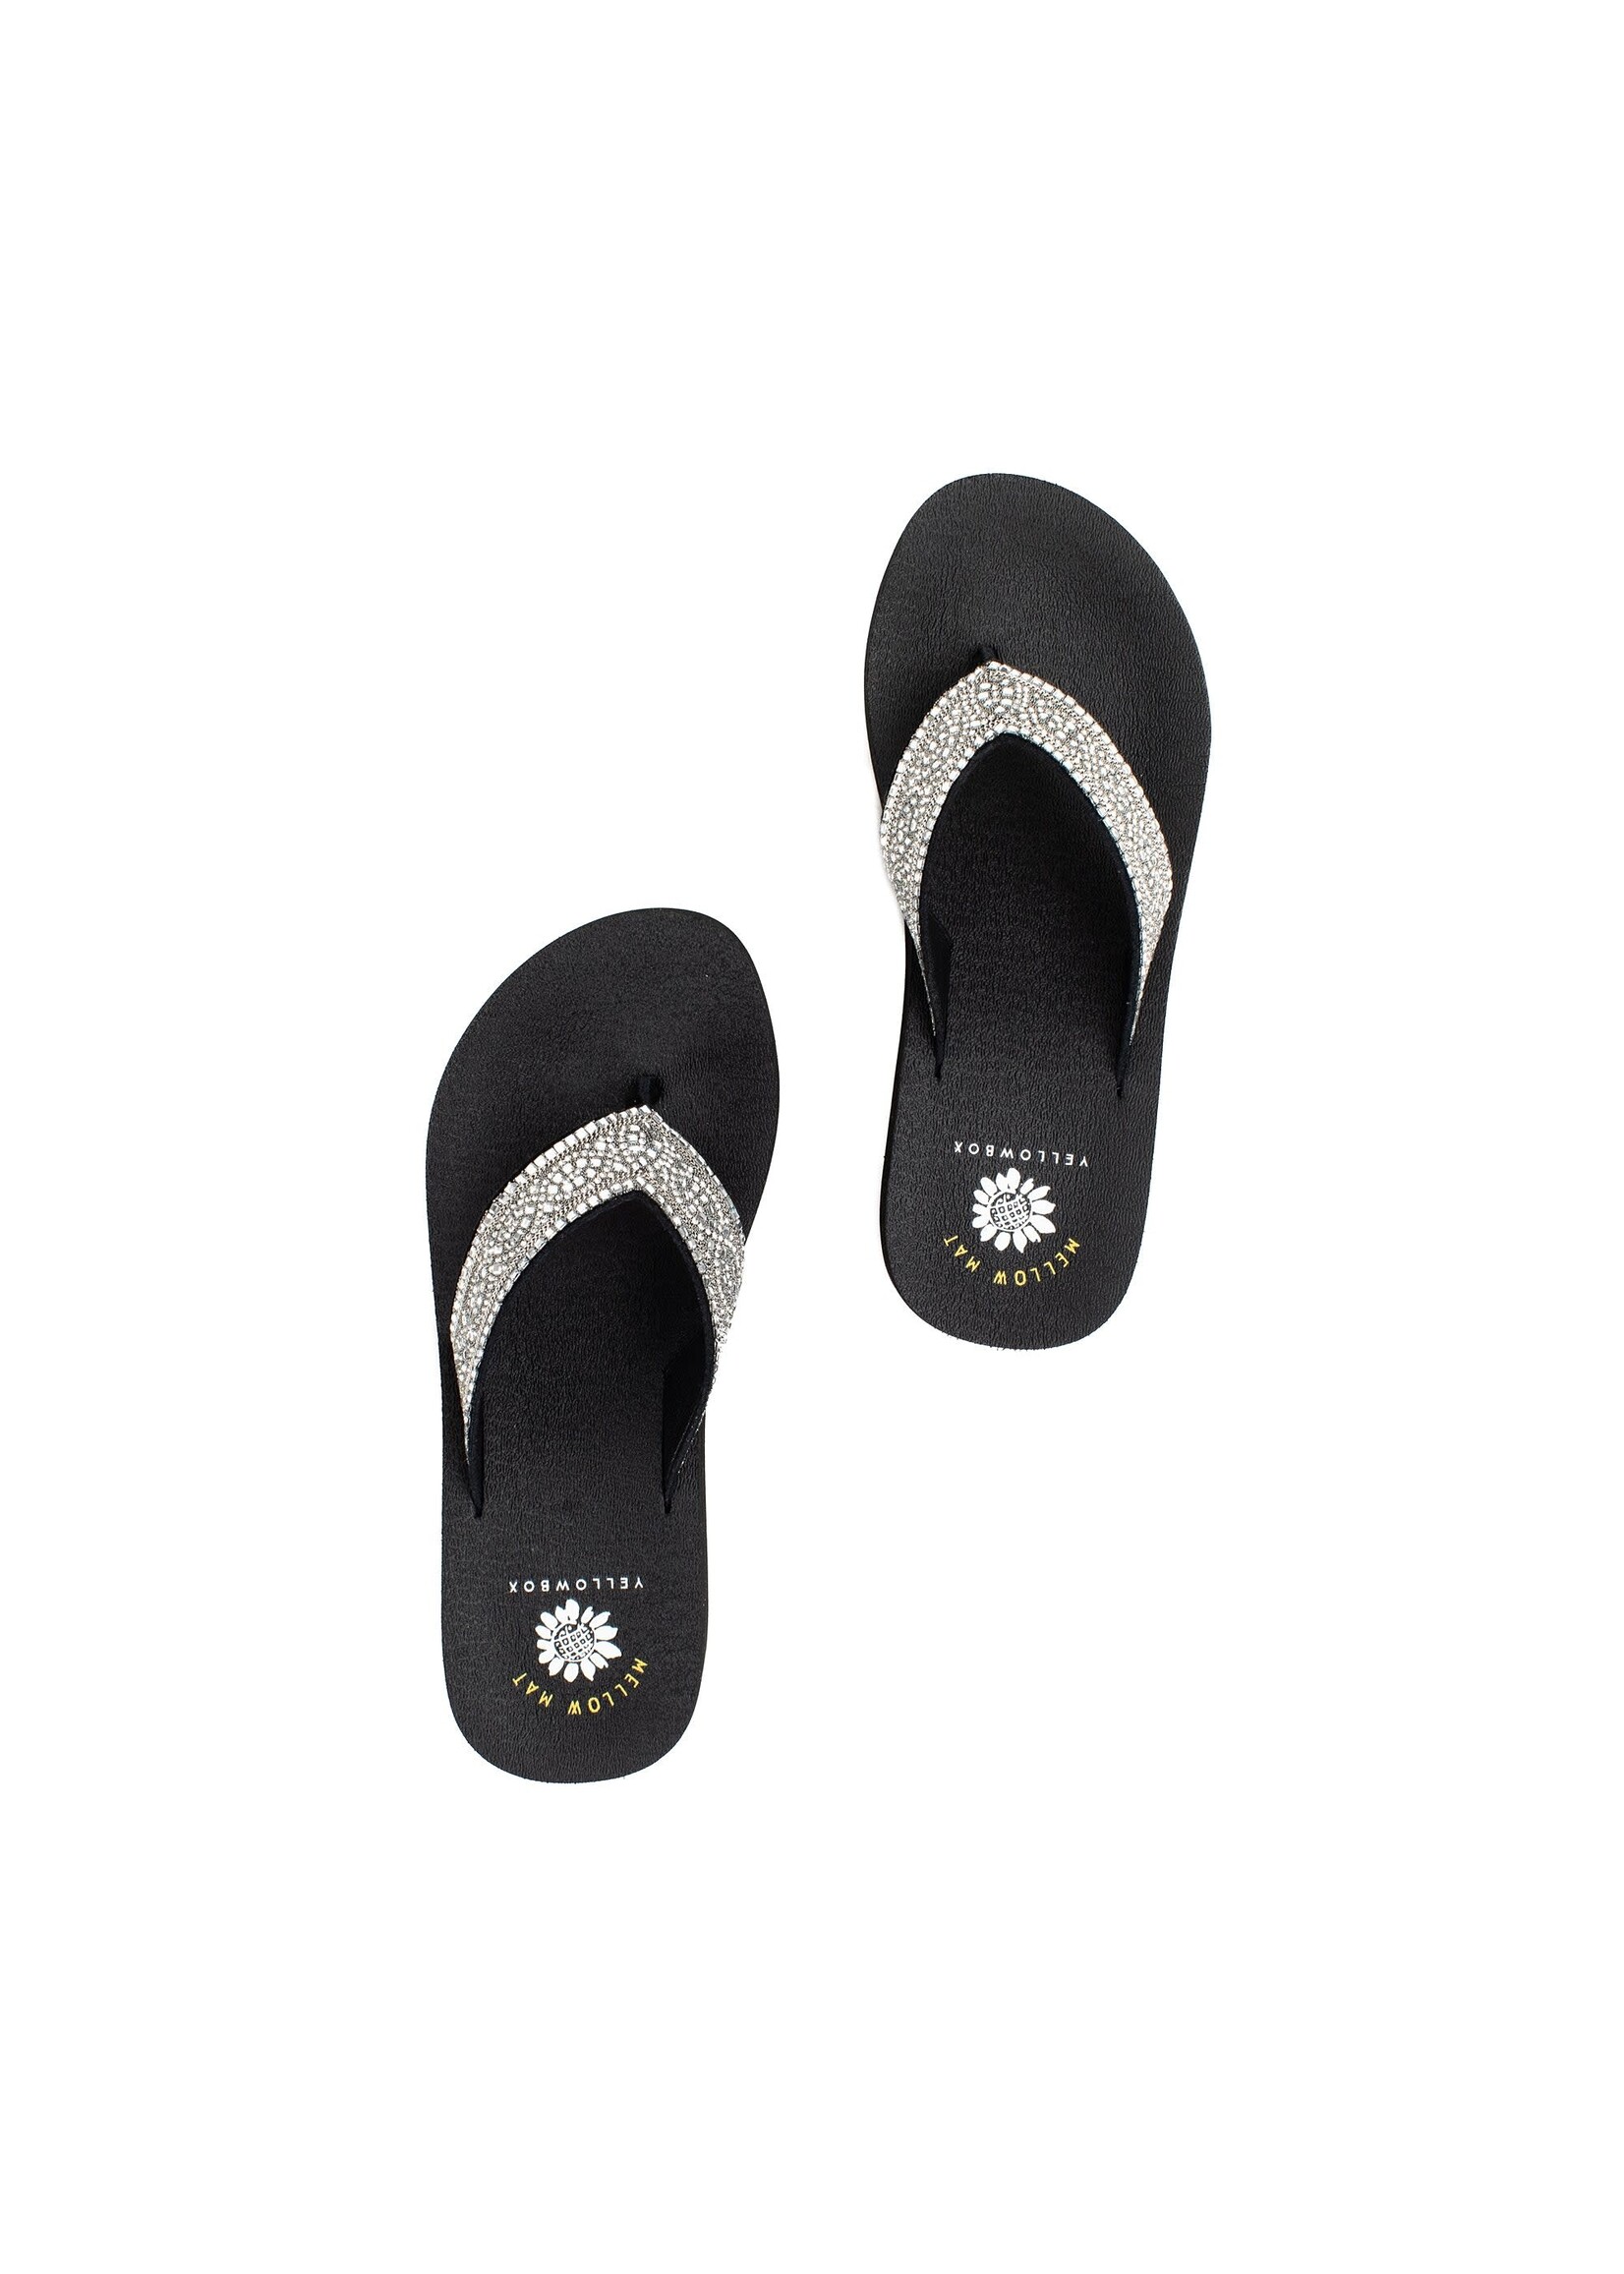 Pixel Flatform Flip Flop Clear Black by Yellowbox - For The Love of Shoes NY